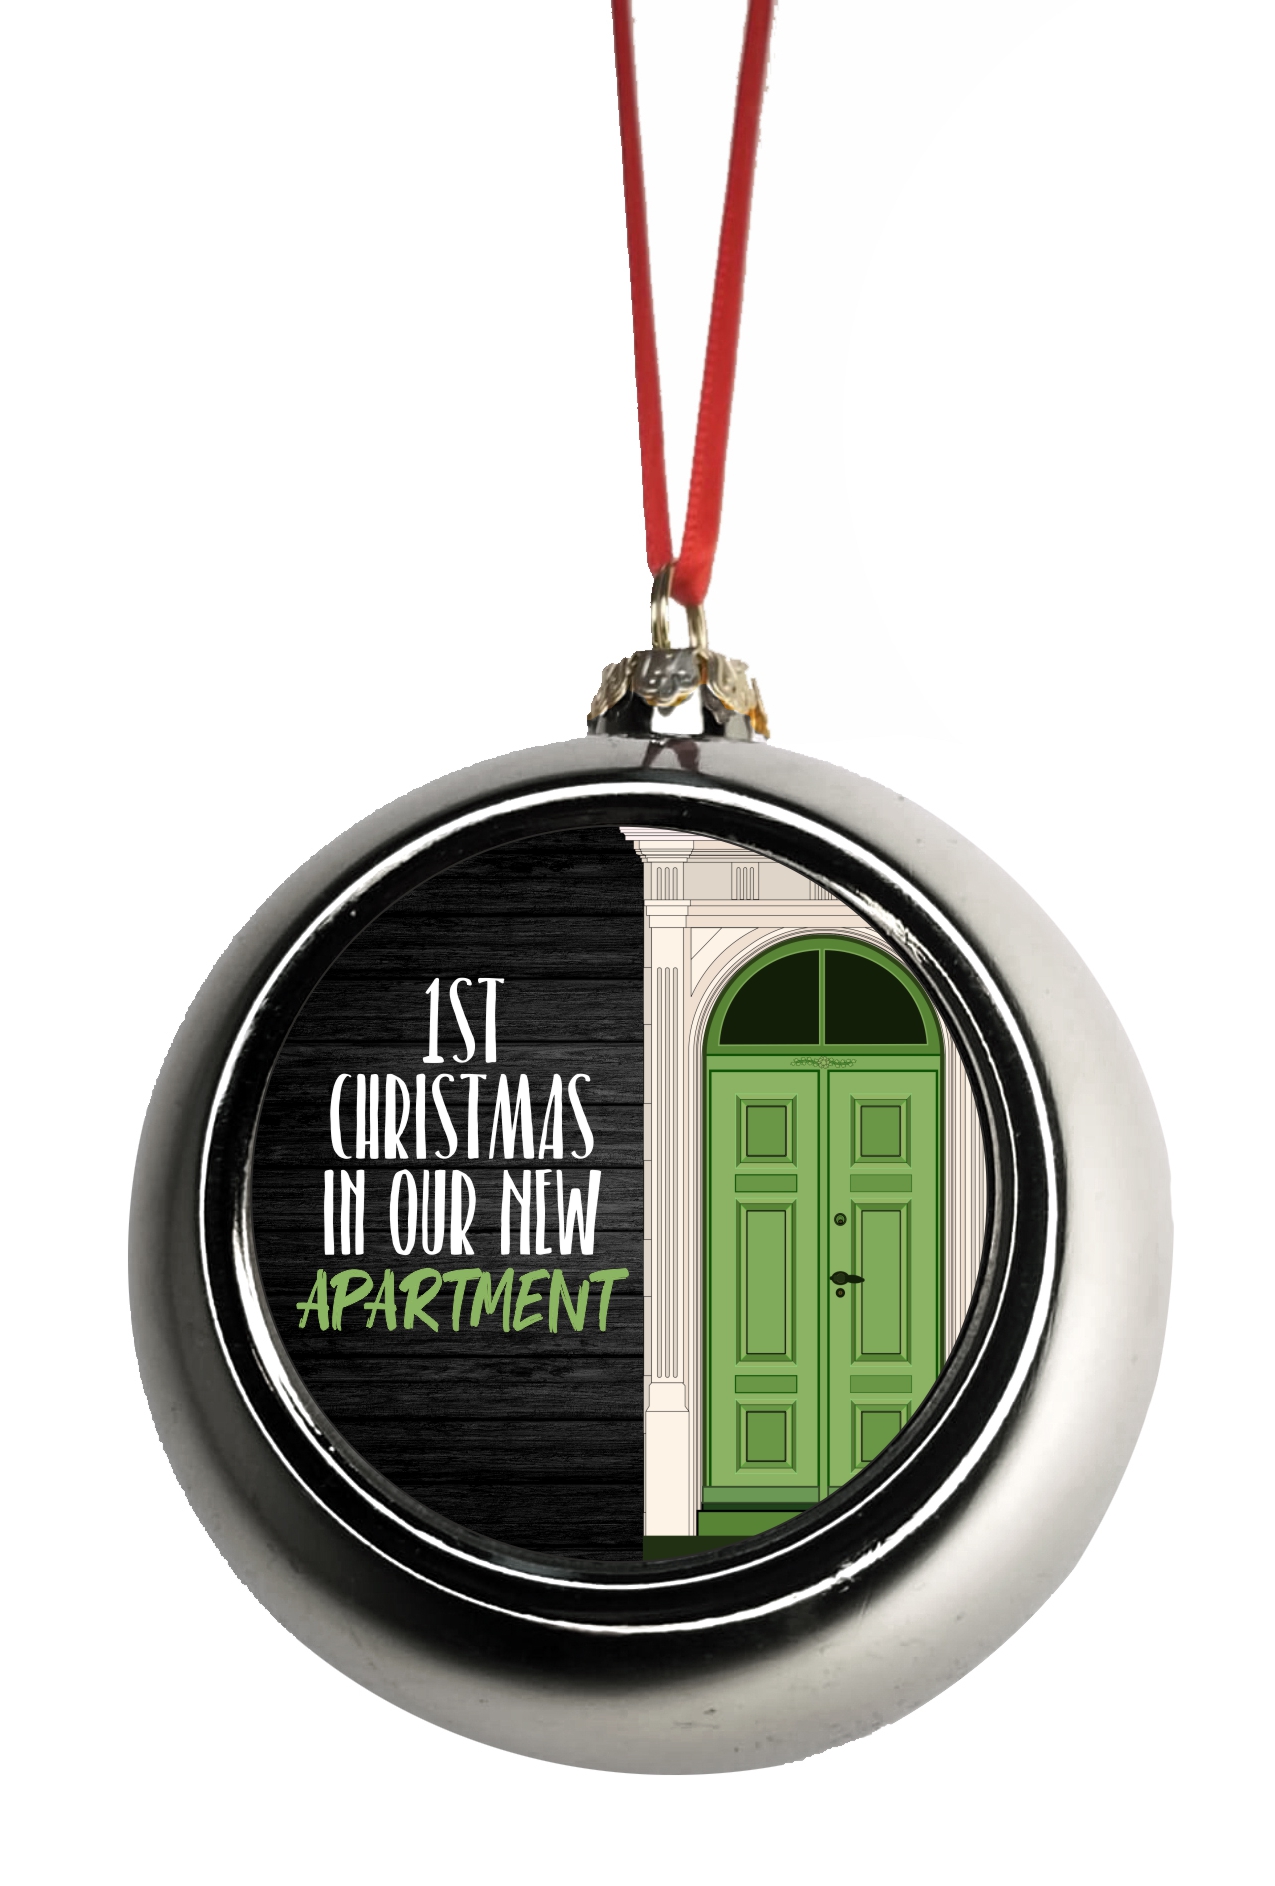 Our First Apartment Christmas Ornament - 1st Apartment Building Christmas Ornament New Apartment Christmas Ornament My First Apartment Christmas Ornament Christmas DÃ©cor Silver Ball Ornaments - image 1 of 1